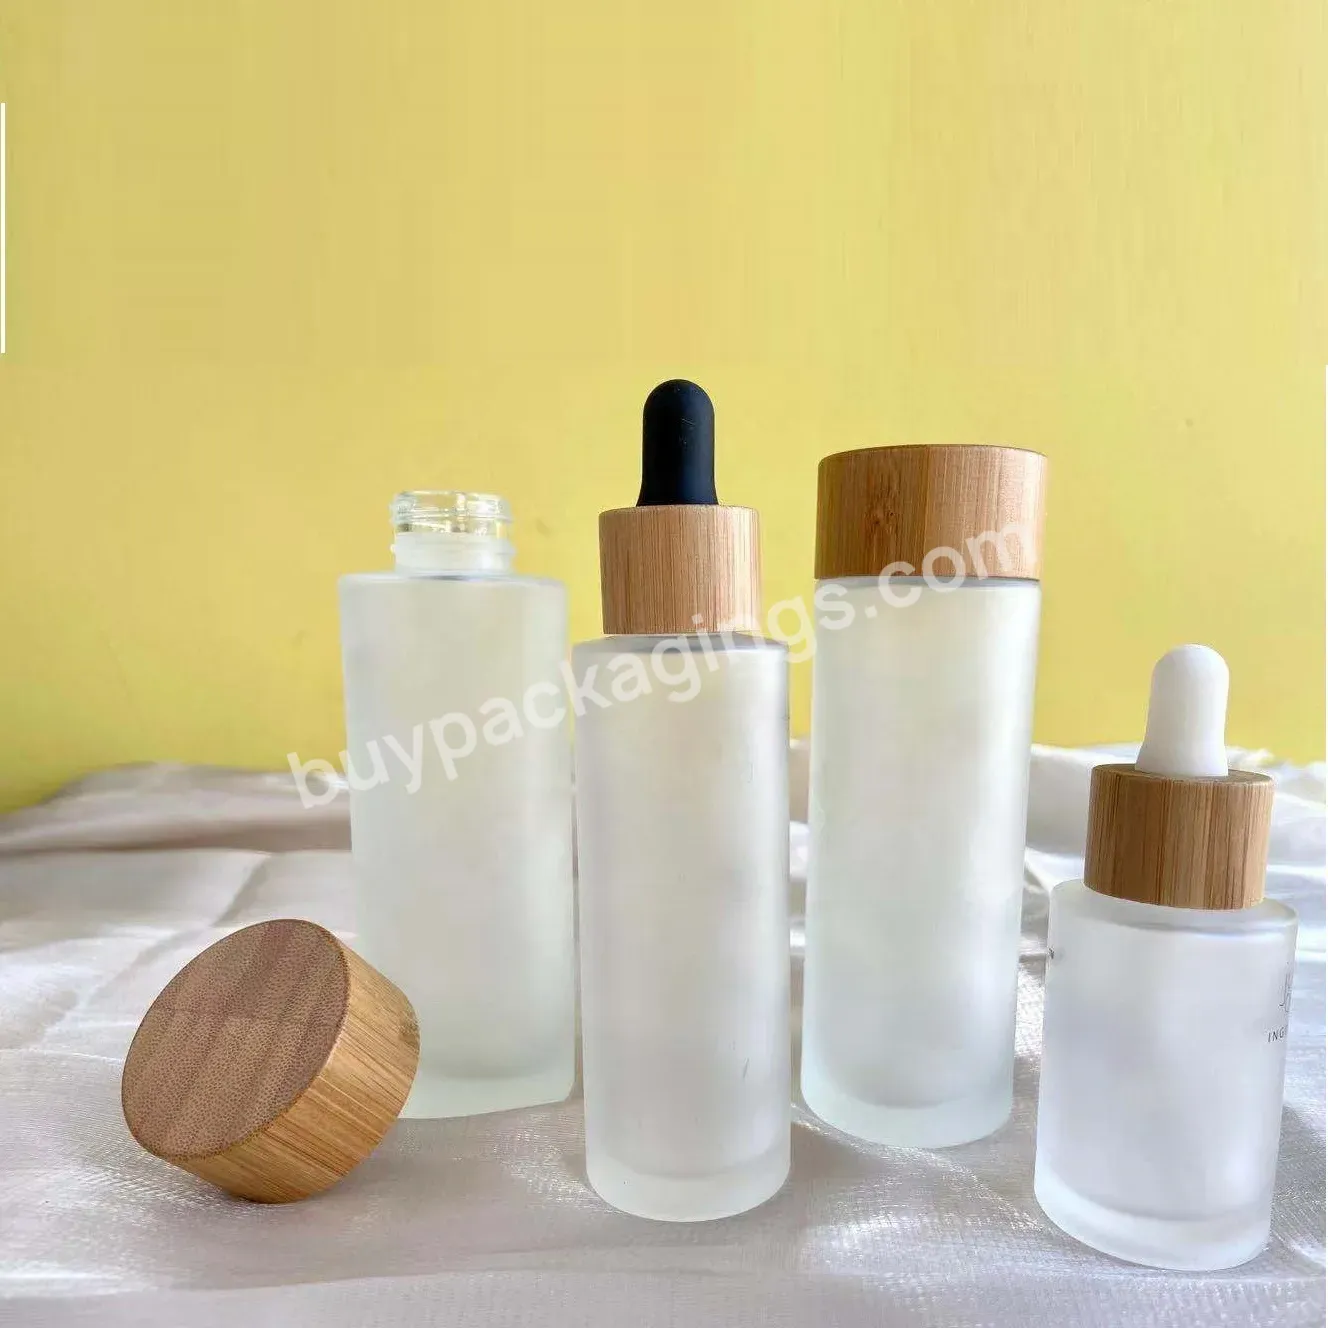 100ml Glass Bottle With Bamboo Screw Cap For Lotion Essential Oil Toner Eco-friendly Cosmetic Bottles - Buy Glass Lotion Bottle With Bamboo Lid,Bamboo Bottles,Eco-friendly Bottles.